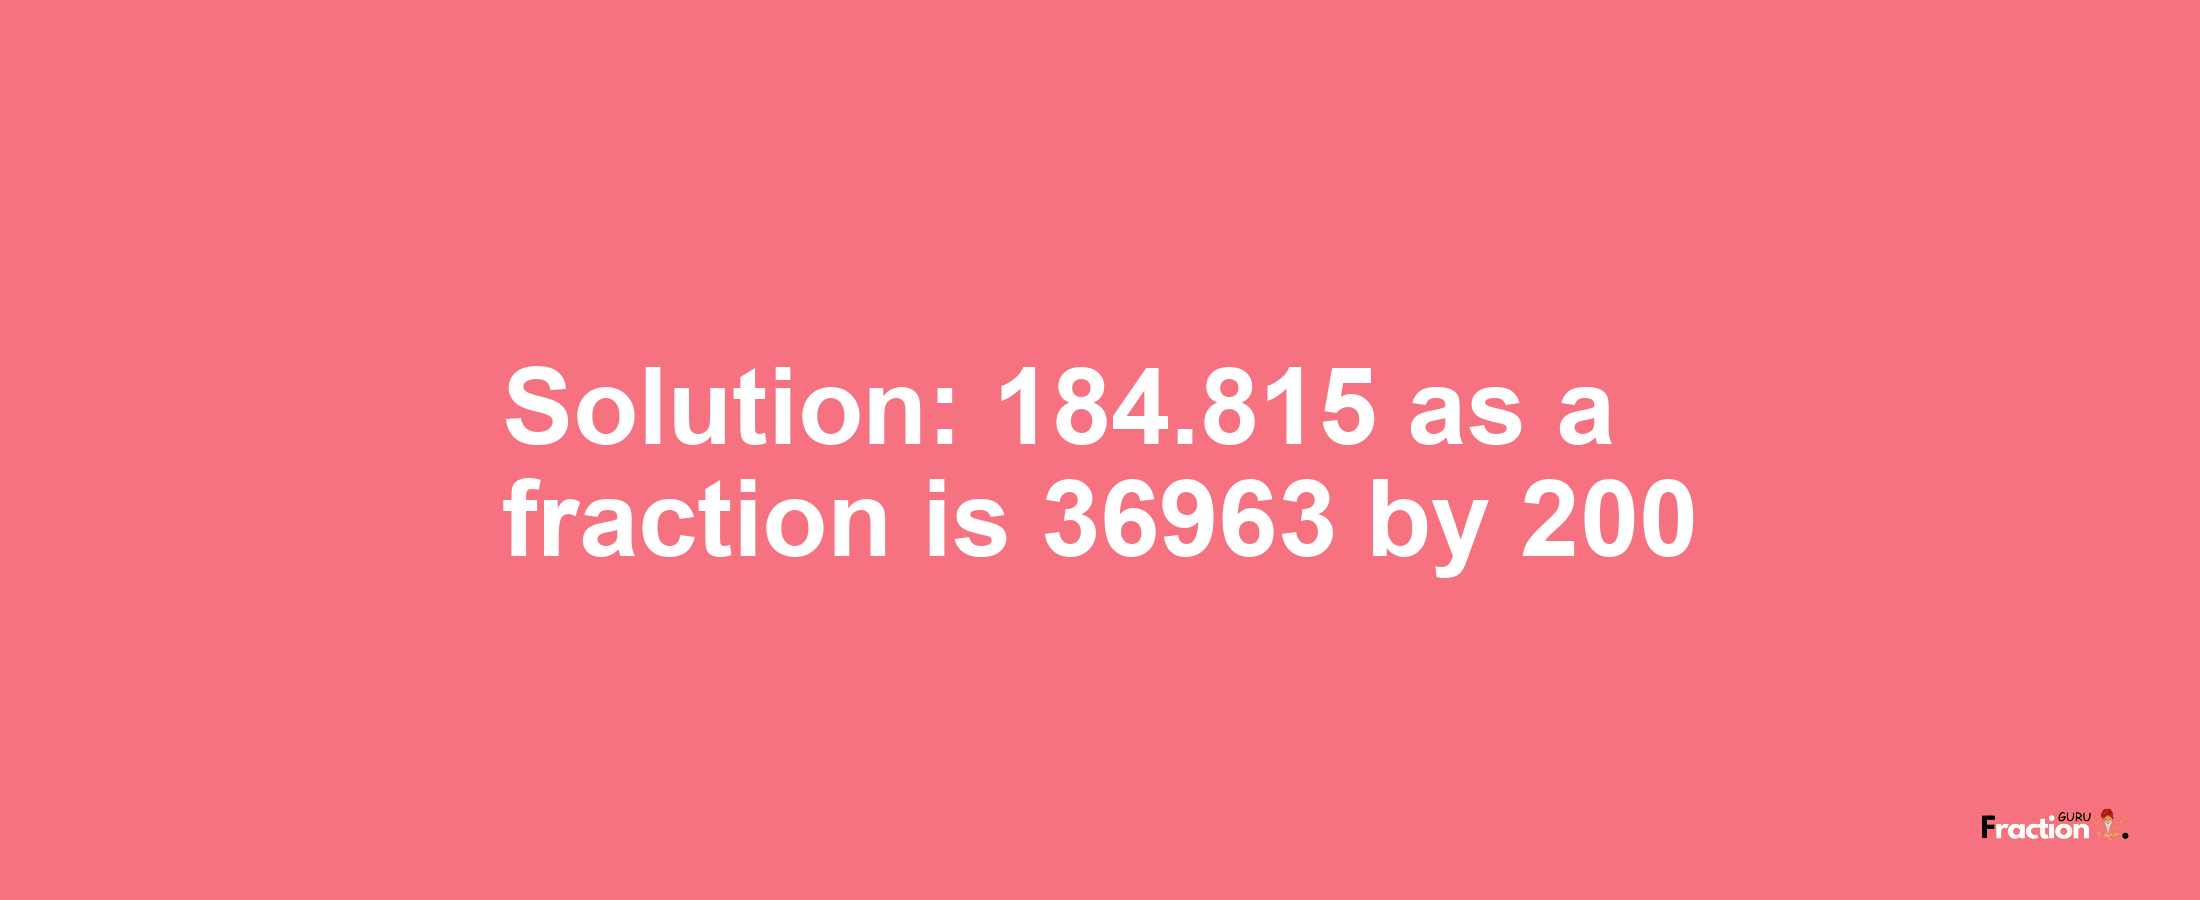 Solution:184.815 as a fraction is 36963/200